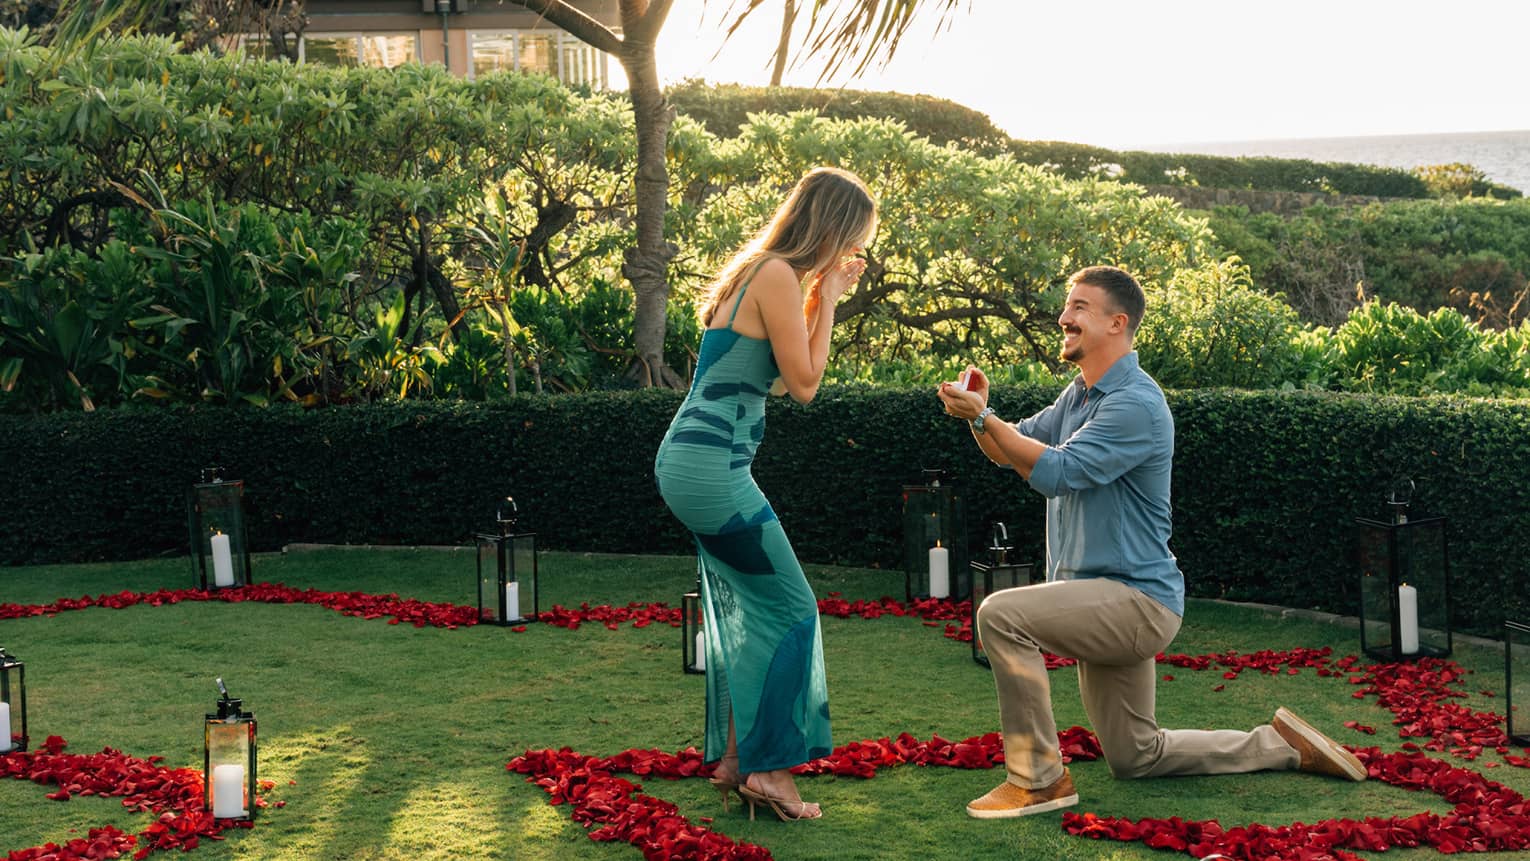 Man proposes to woman on one knee while in a tropical lawn scattered with rose petals